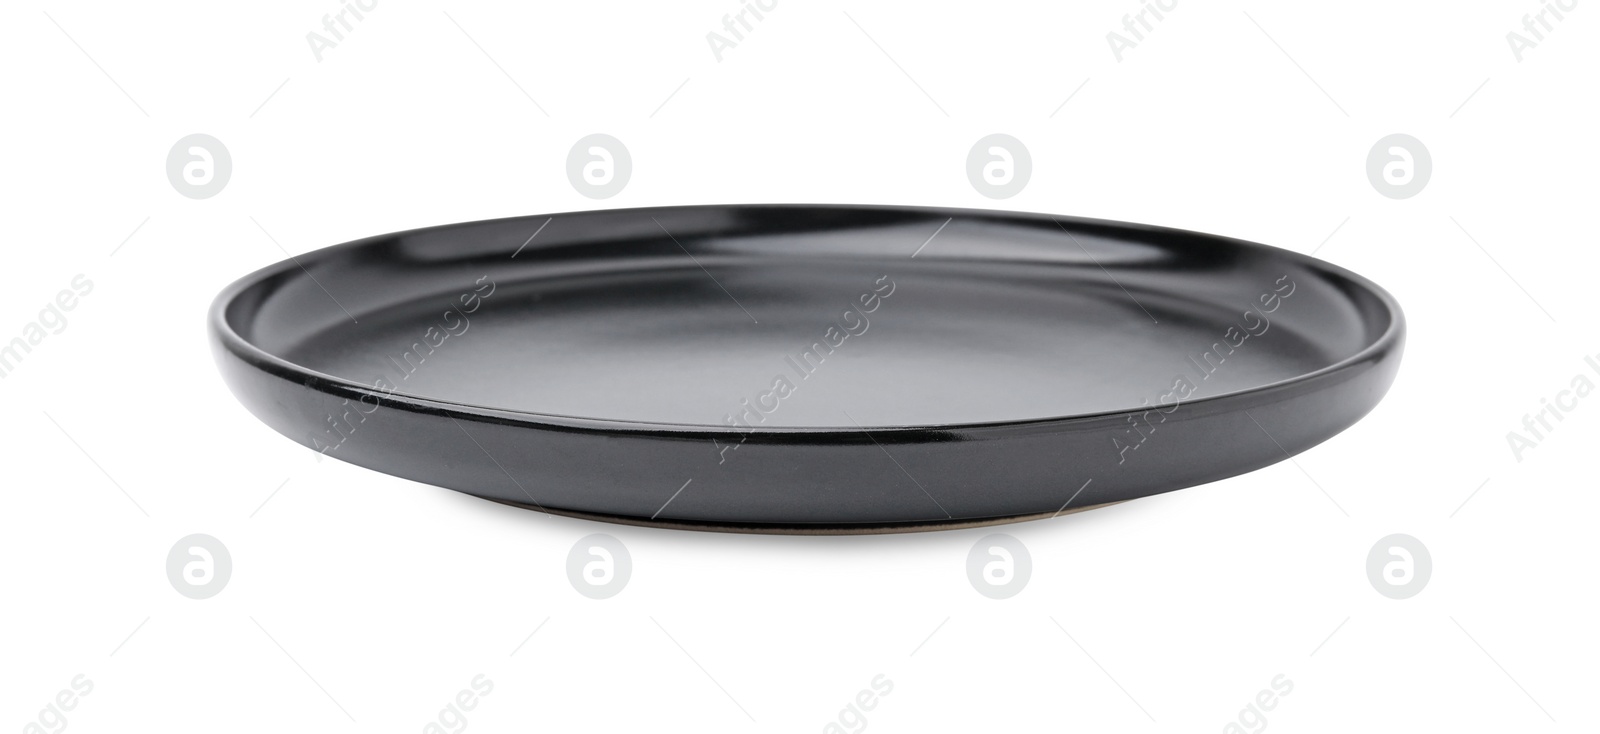 Photo of One black ceramic plate isolated on white. Cooking utensil